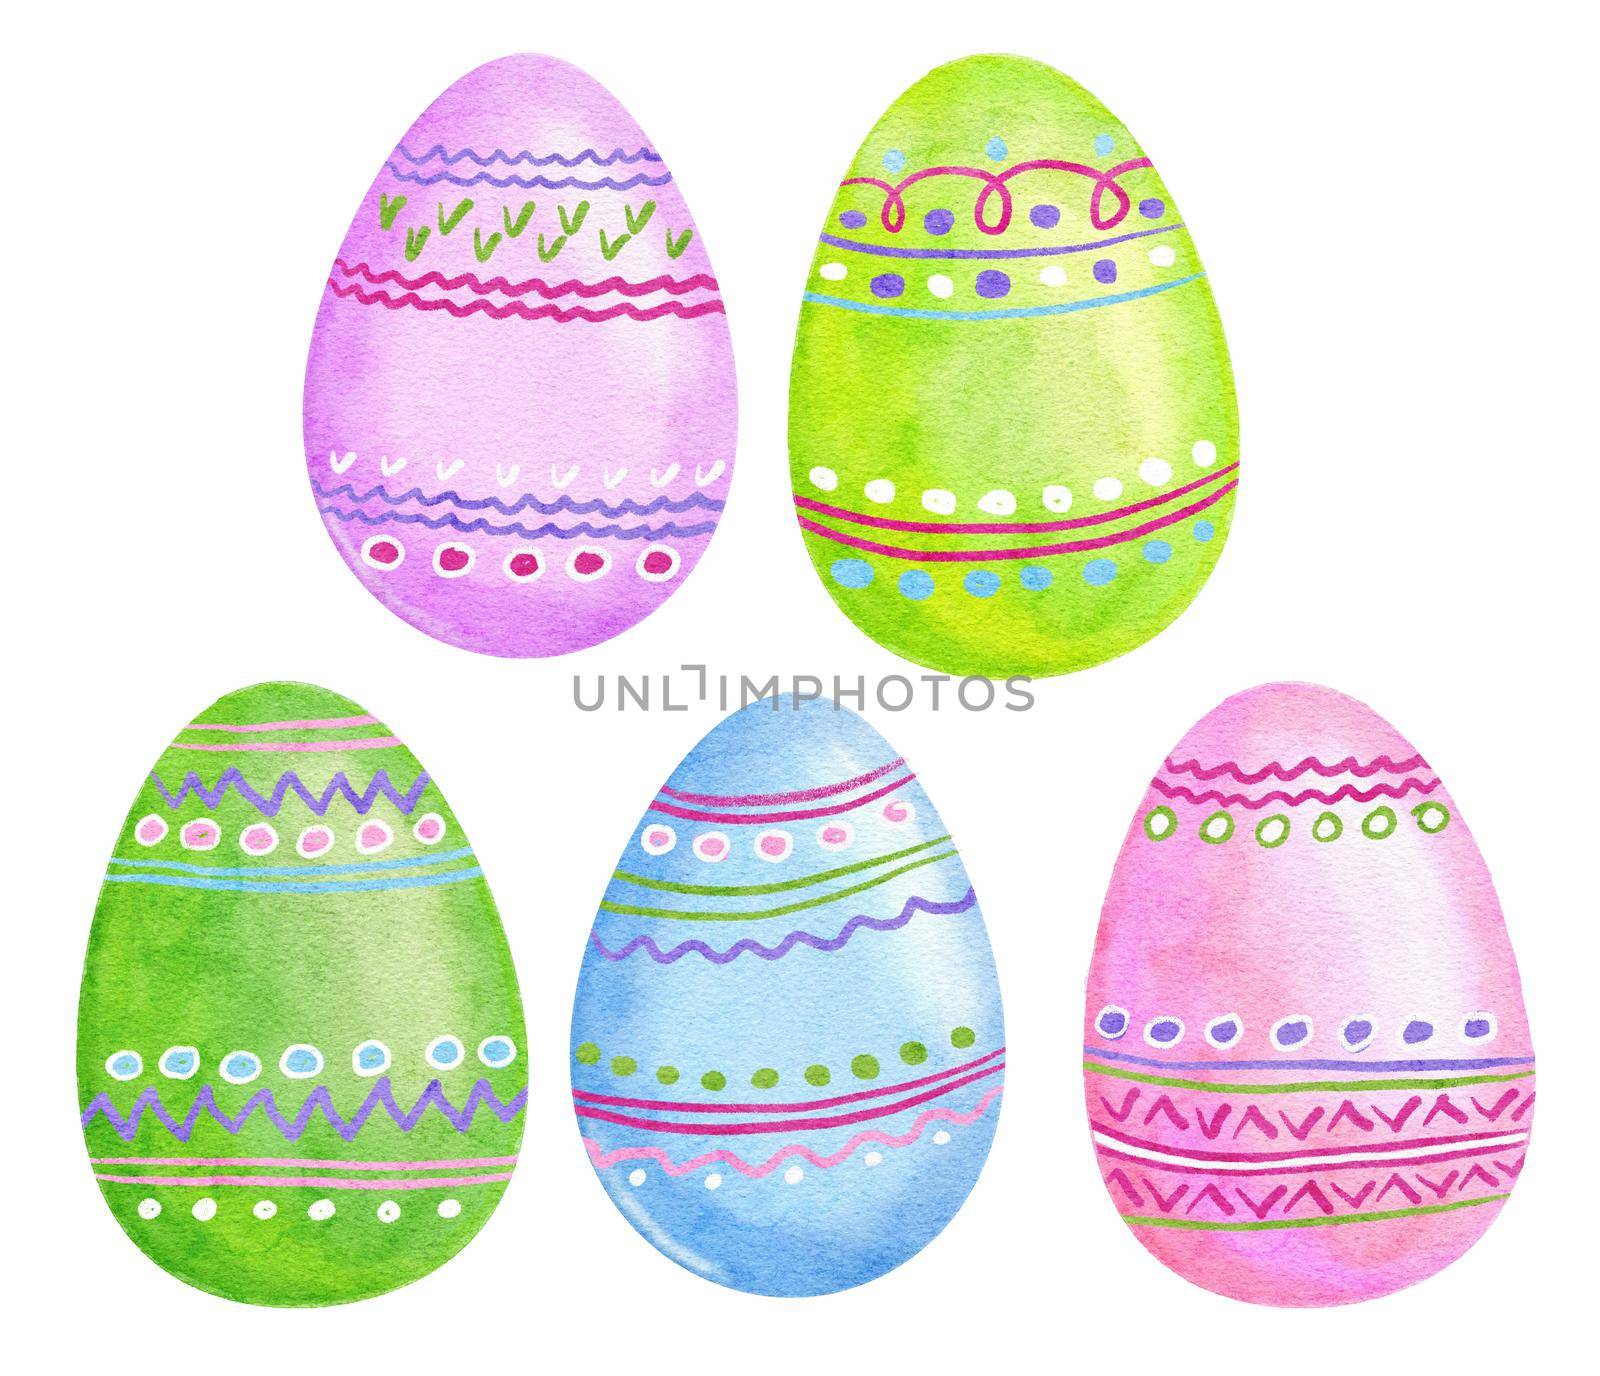 Watercolor hand drawn Easter eggs illustration with green blue pink pastel colors,. Spring april religious holiday concept. Catroon style print for invitations cards